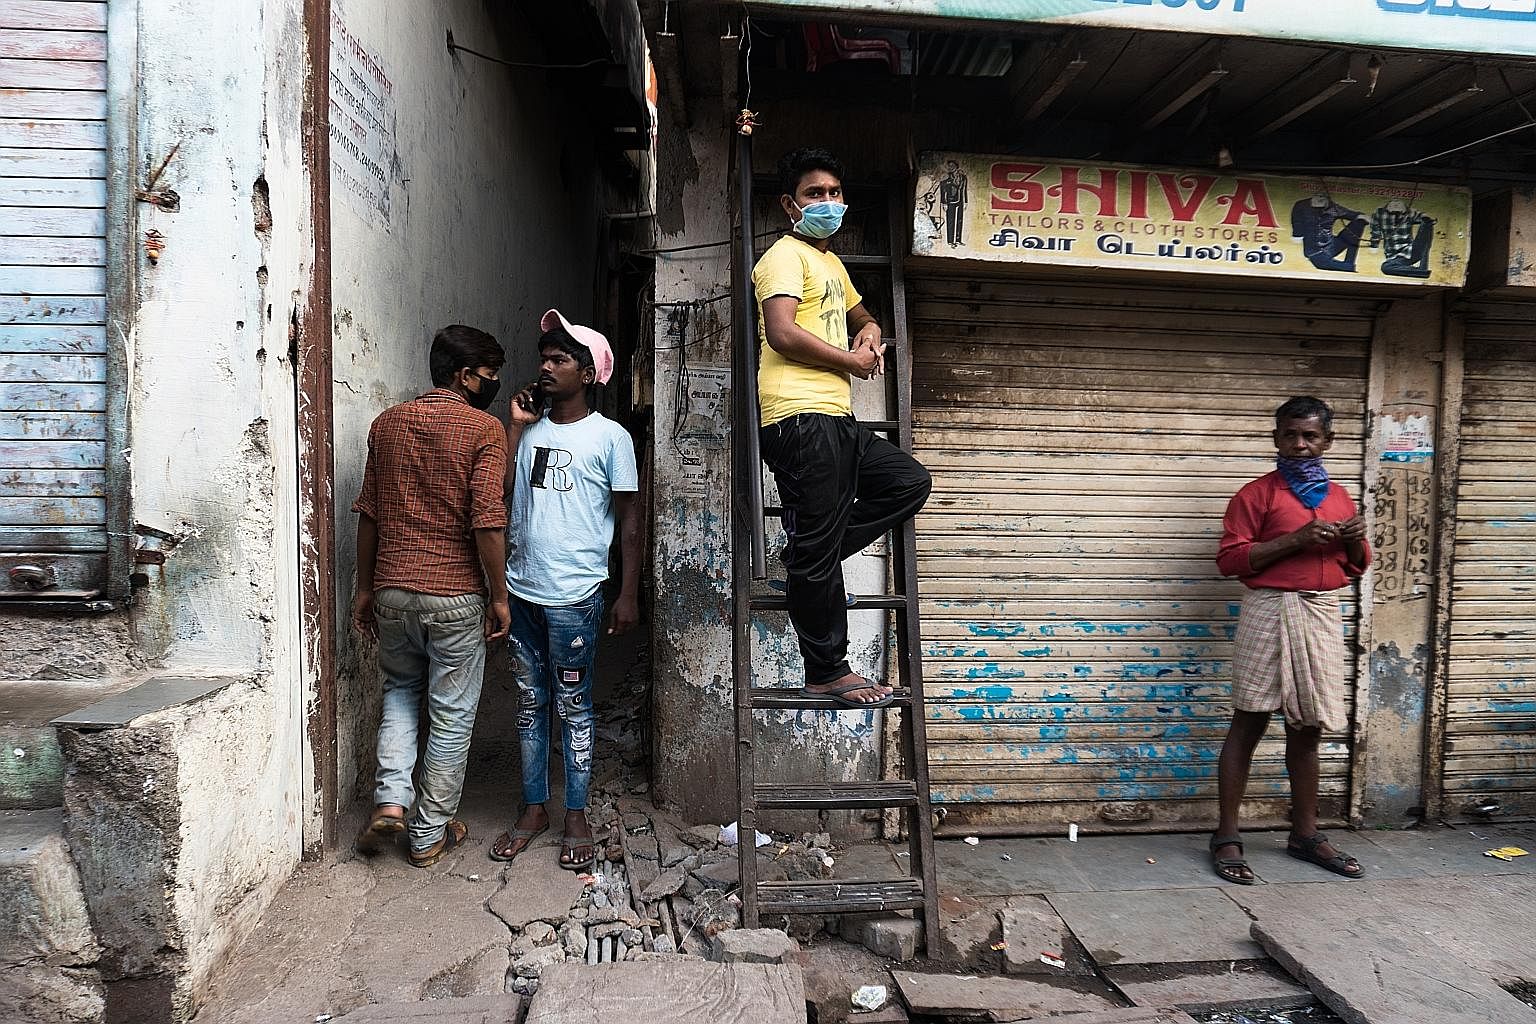 Above: Residents in Dharavi, a slum in Mumbai, keeping their distance while waiting to buy provisions from a private grocery store. Left: The majority of houses in Dharavi are smaller than 150 sq ft and are home to six occupants on average. Social di